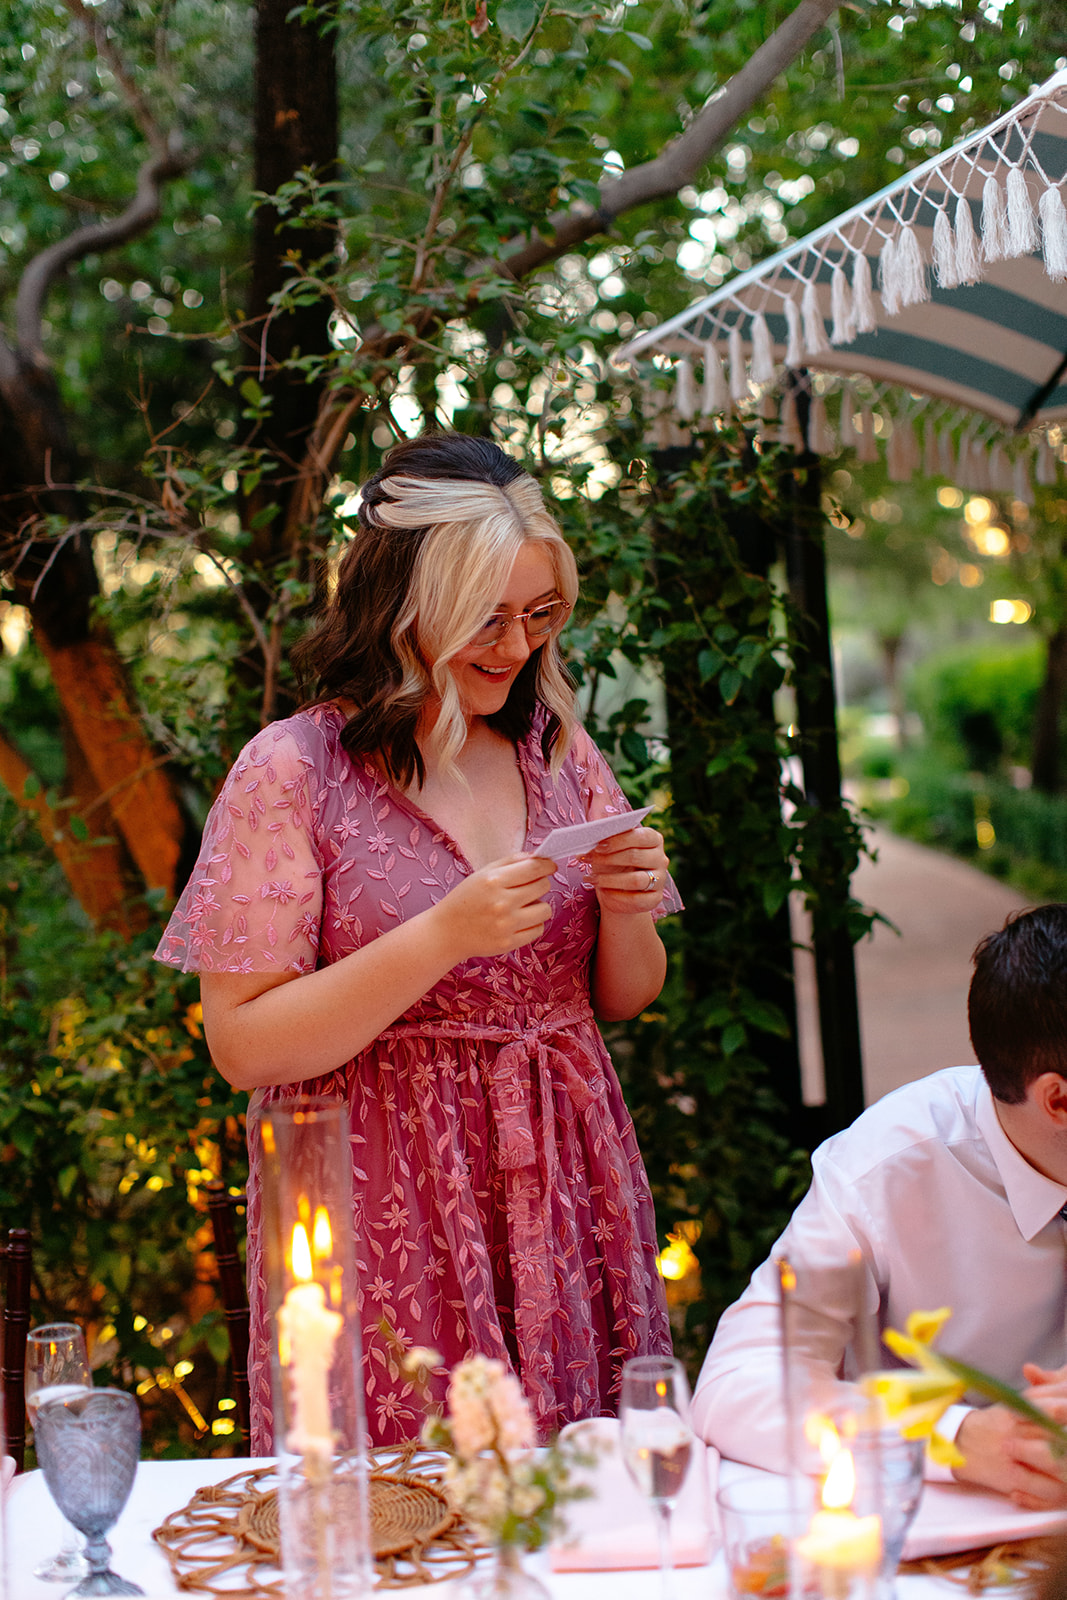 A woman in a pink floral dress reads a note at a candlelit dinner table, smiling, with greenery and string lights in the background at a garden party wedding.